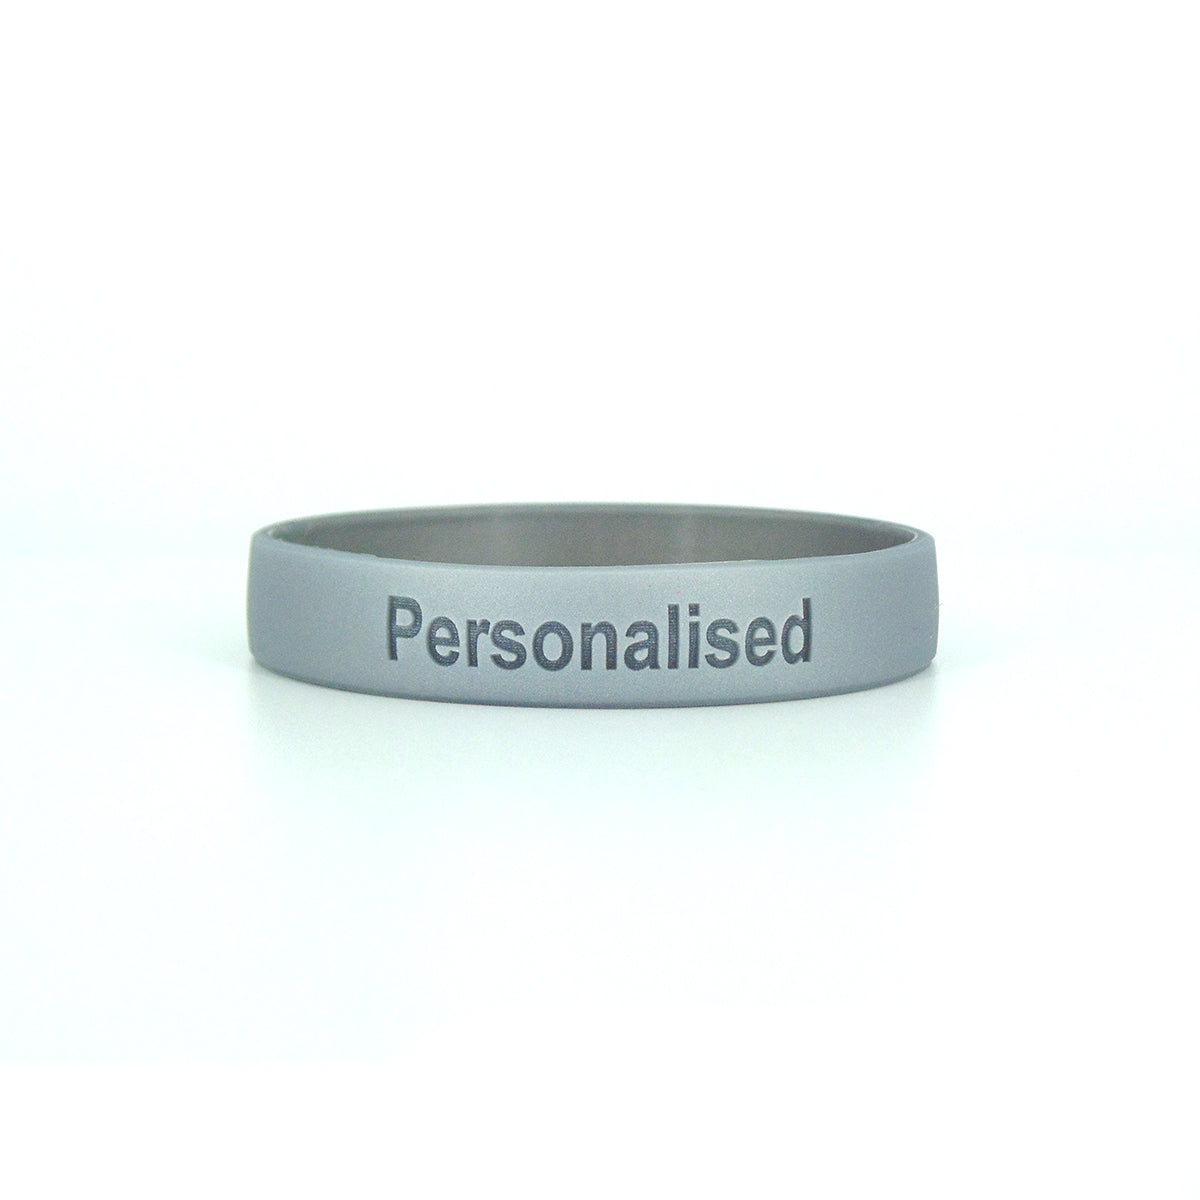 Embossed Silicone Wristbands - STARLING Silicone